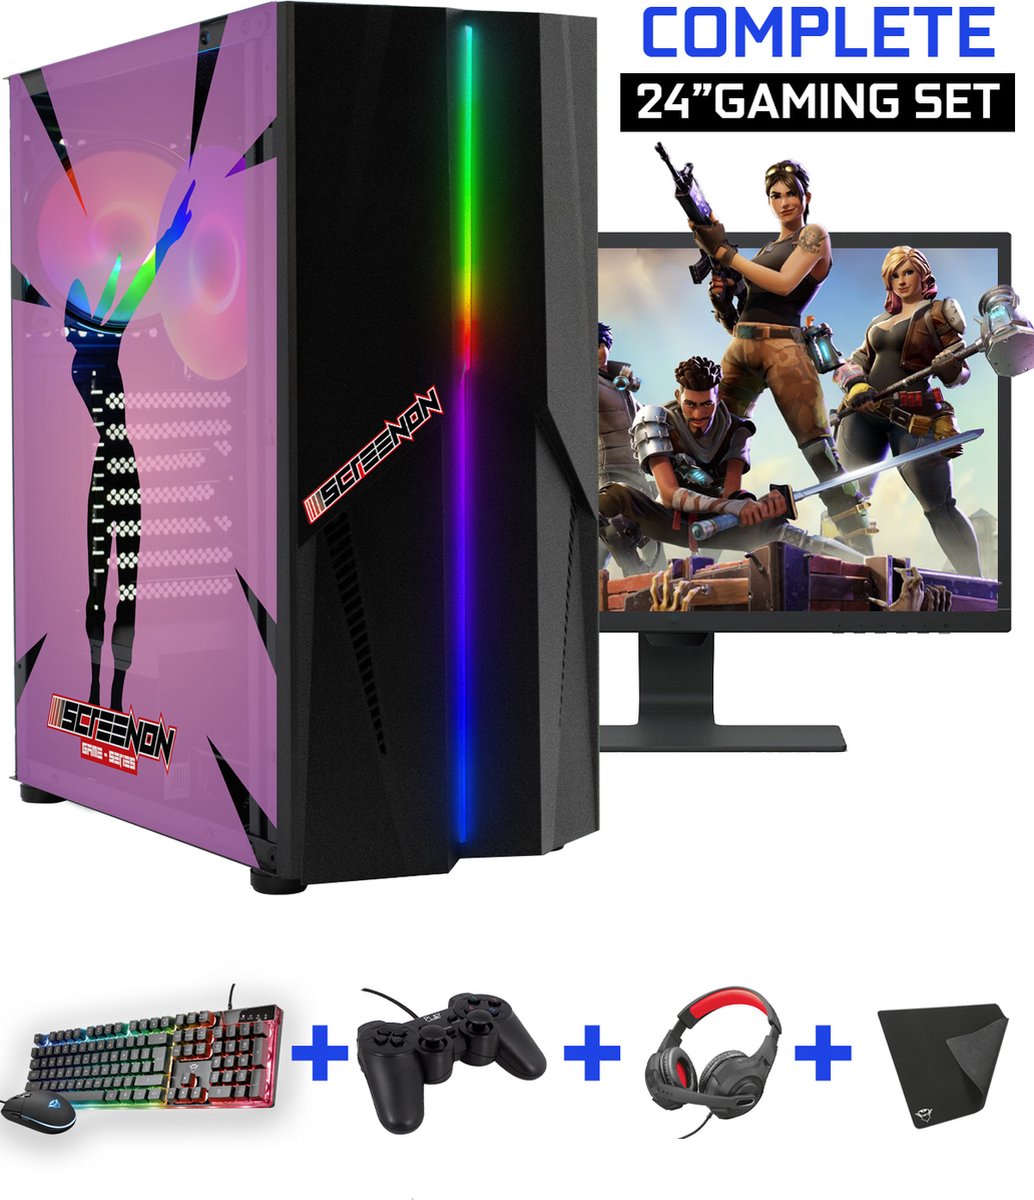 ScreenON - Game PC - Complete Fortnite Gaming PC Set - X13899 - V1 ( Game PC X13899 + 24 Inch Monitor + Toetsenbord + Muis + Controller )